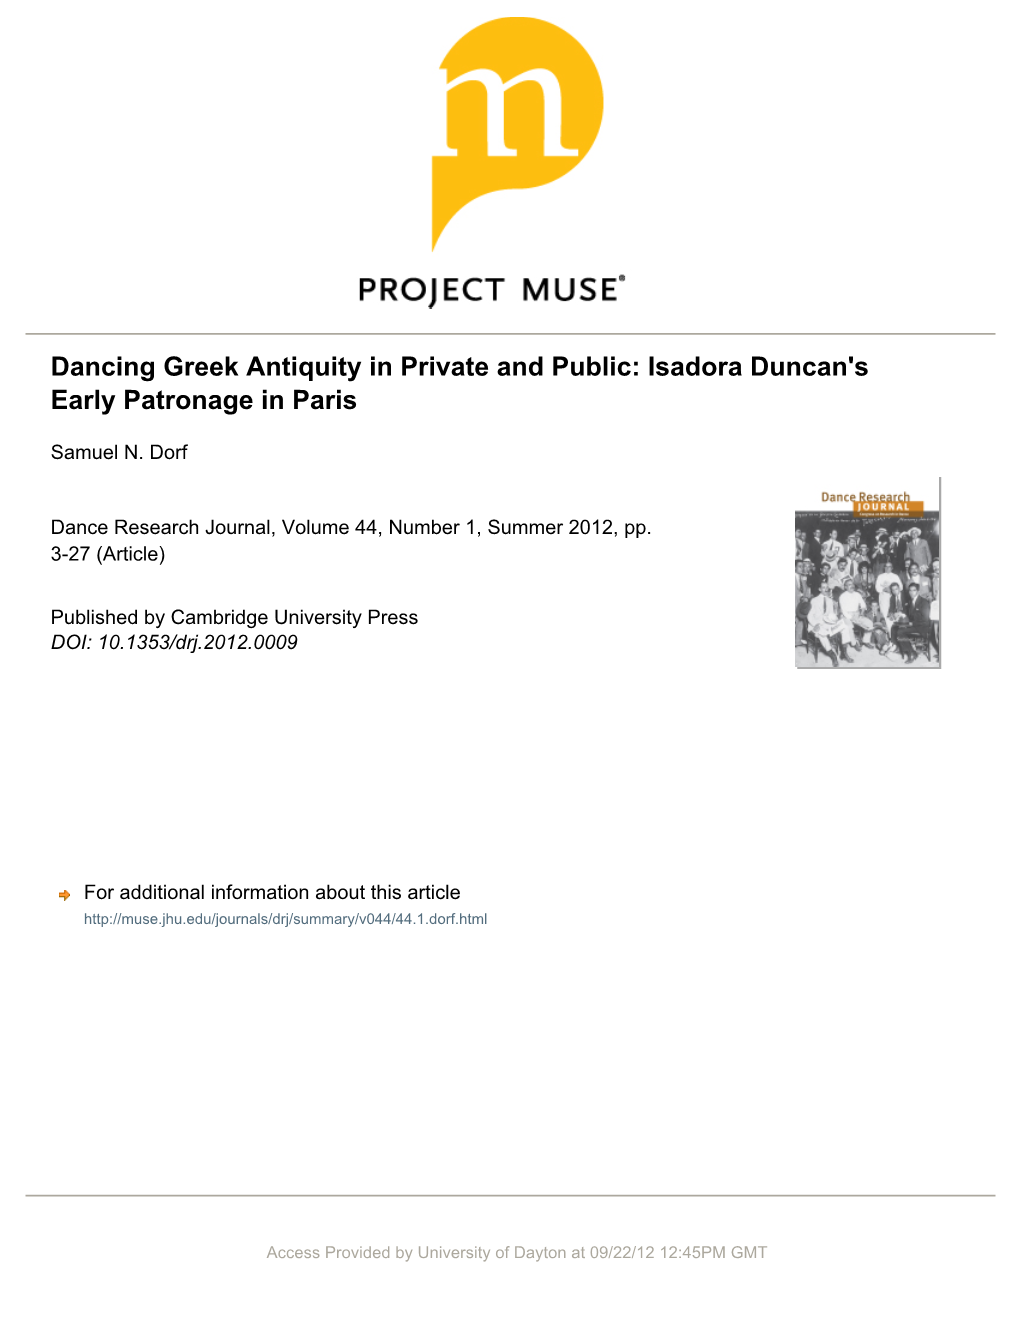 Dancing Greek Antiquity in Private and Public: Isadora Duncan's Early Patronage in Paris